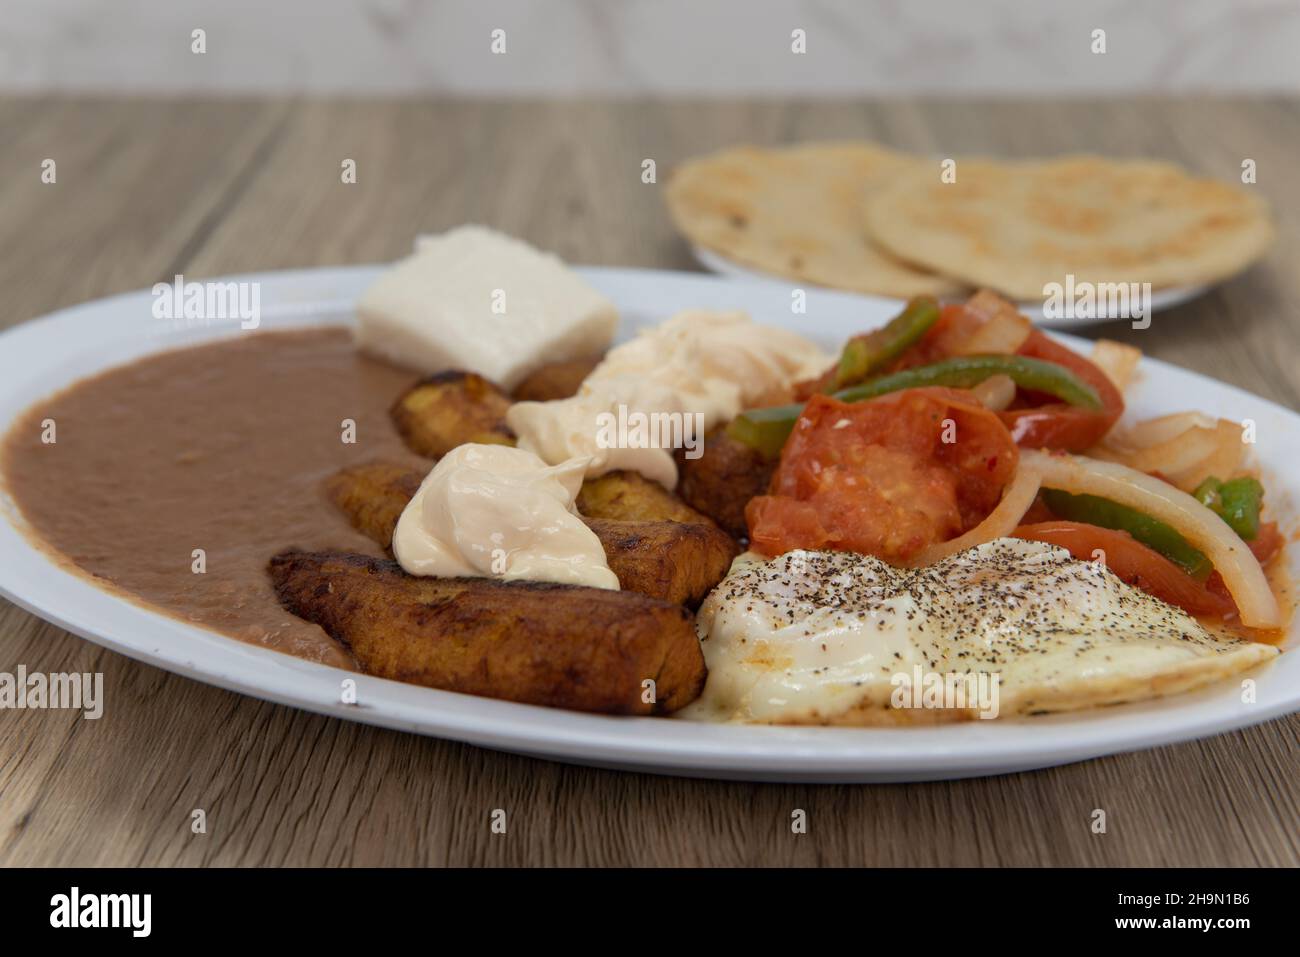 Fried plantains on a plate with refried beans, stir fried vegetables, and eggs served sunny side up with pupusa bread for a Latino meal. Stock Photo